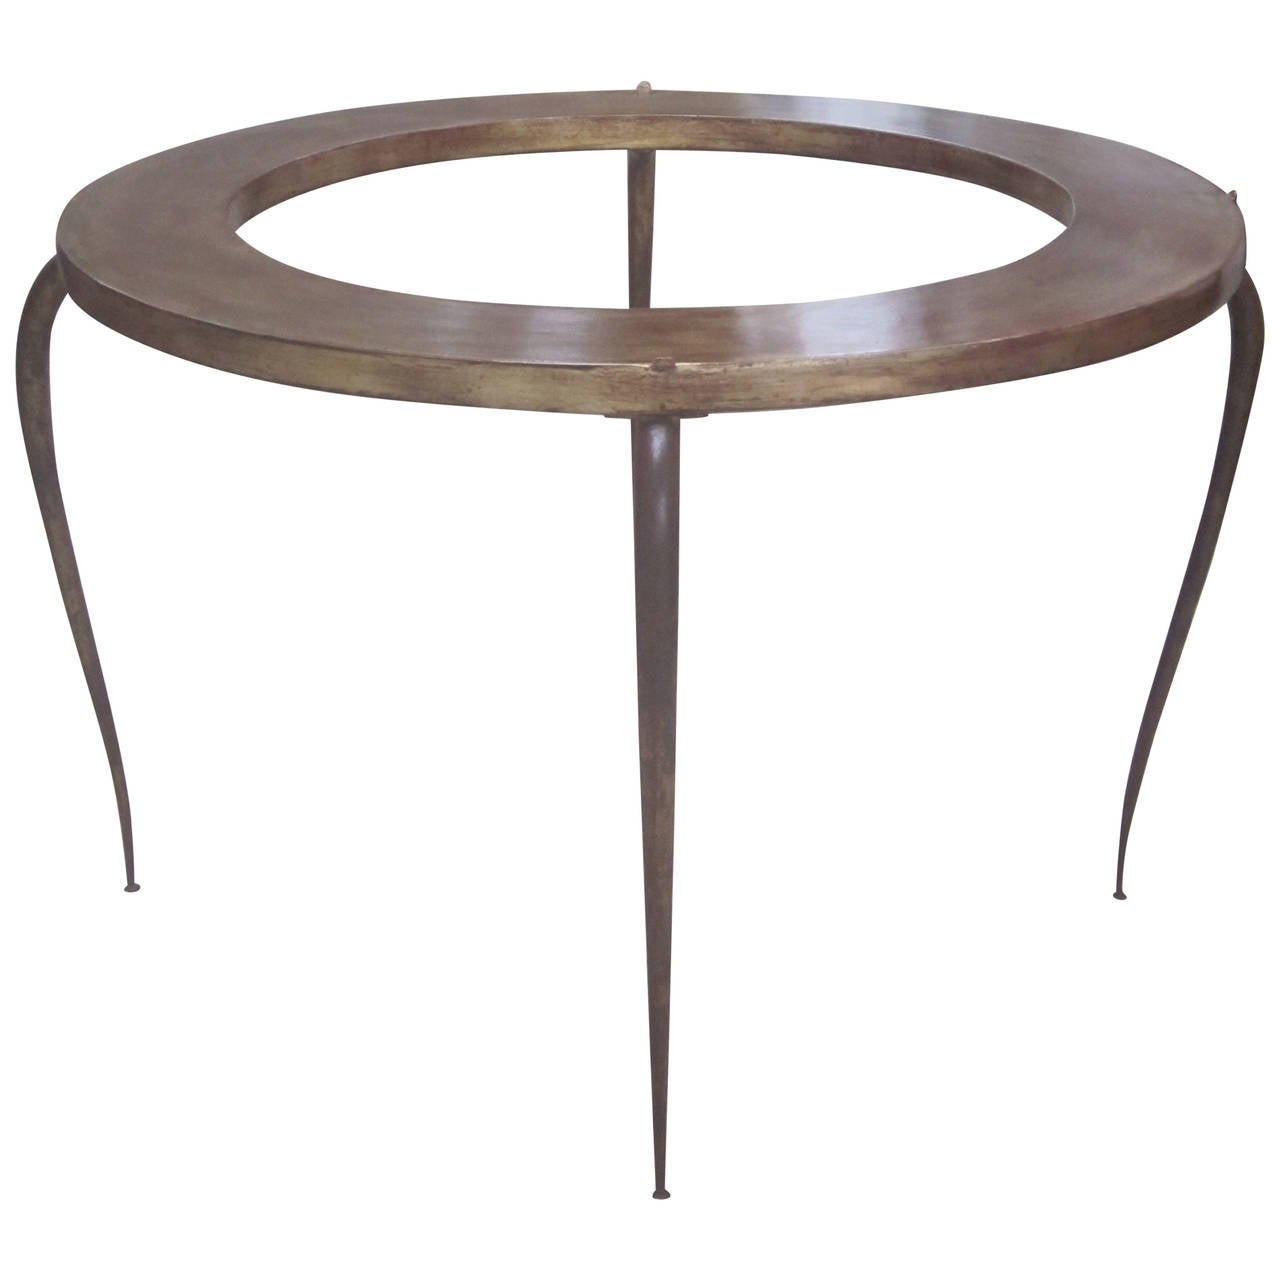 French Mid-Century Modern Round Gilt Iron Coffee Table by Rene Prou, 1940